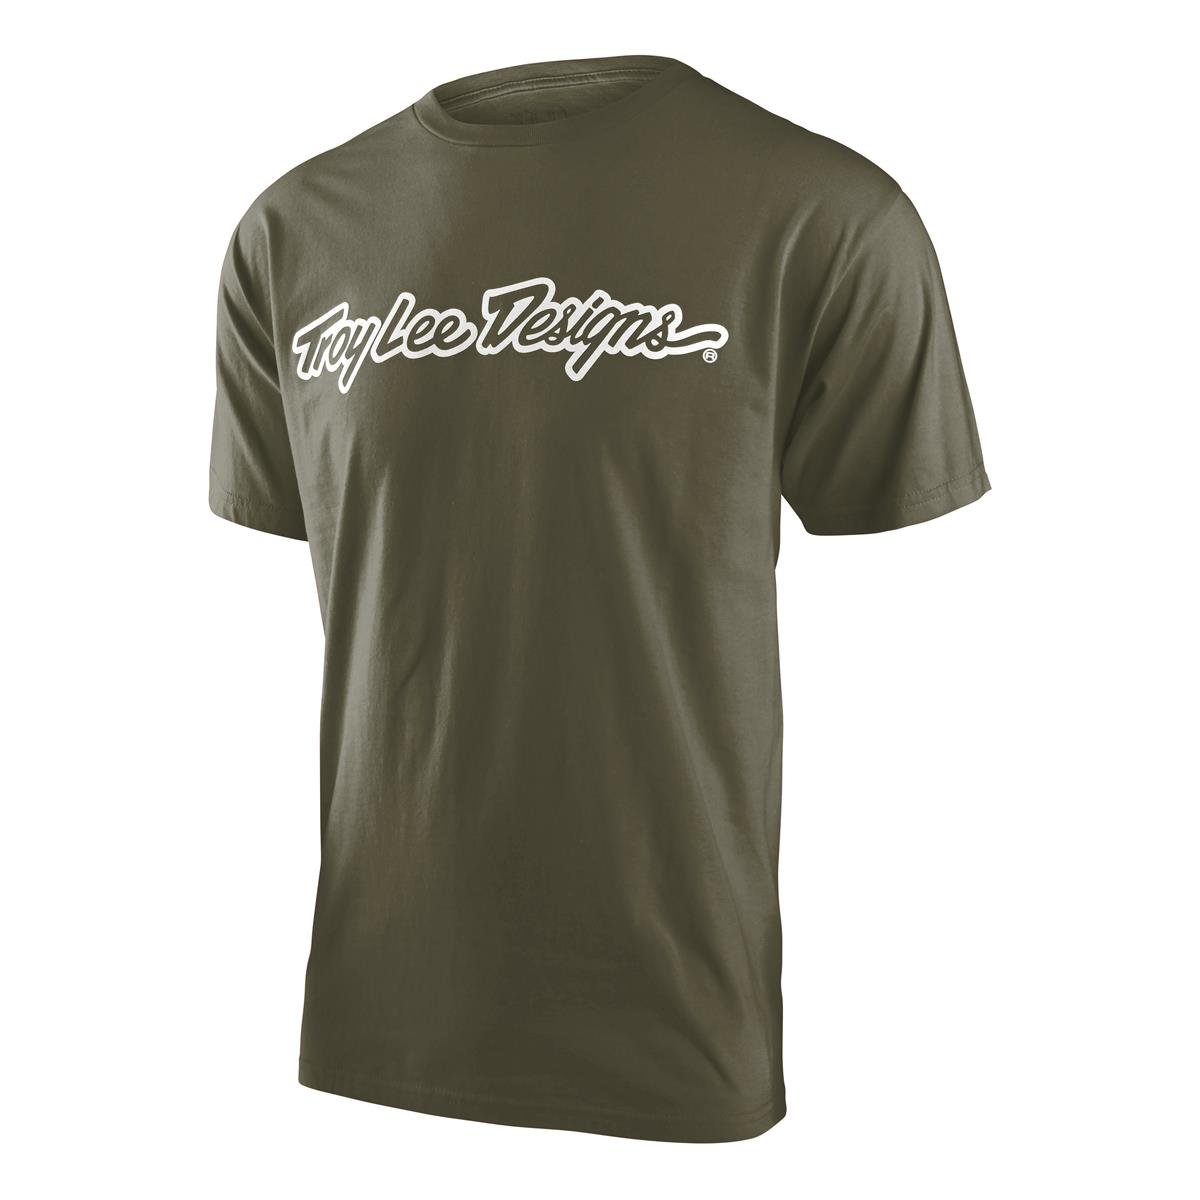 Troy Lee Designs T-Shirt Signature Military Green